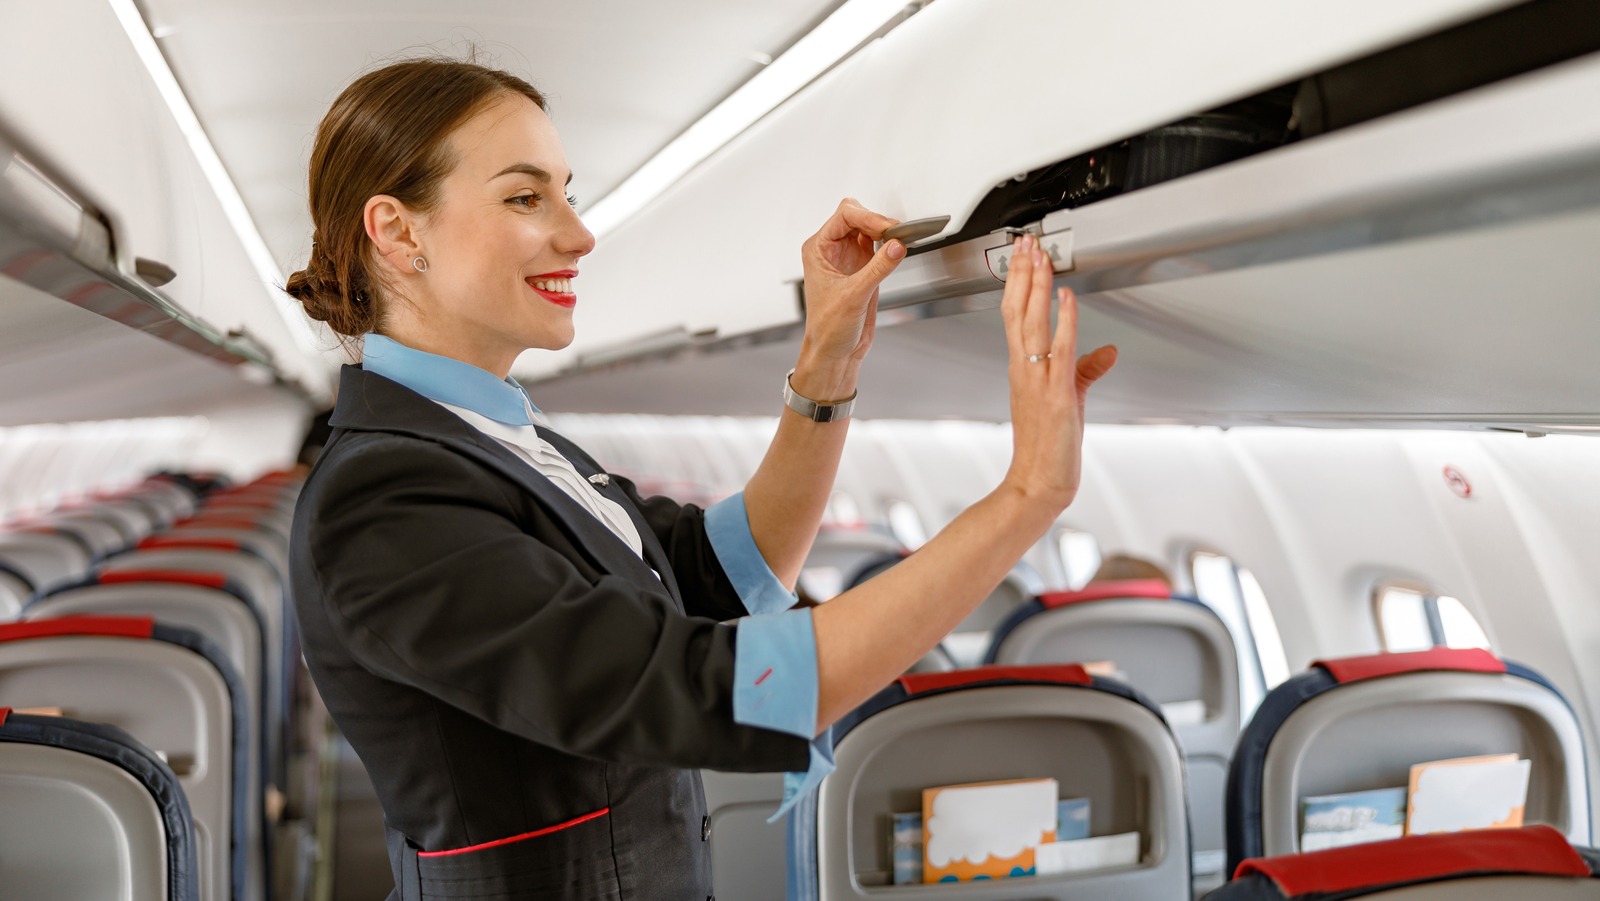 Emirates Cabin Crew Requirements  Scars  Tattoos  How to Hide Them   YouTube